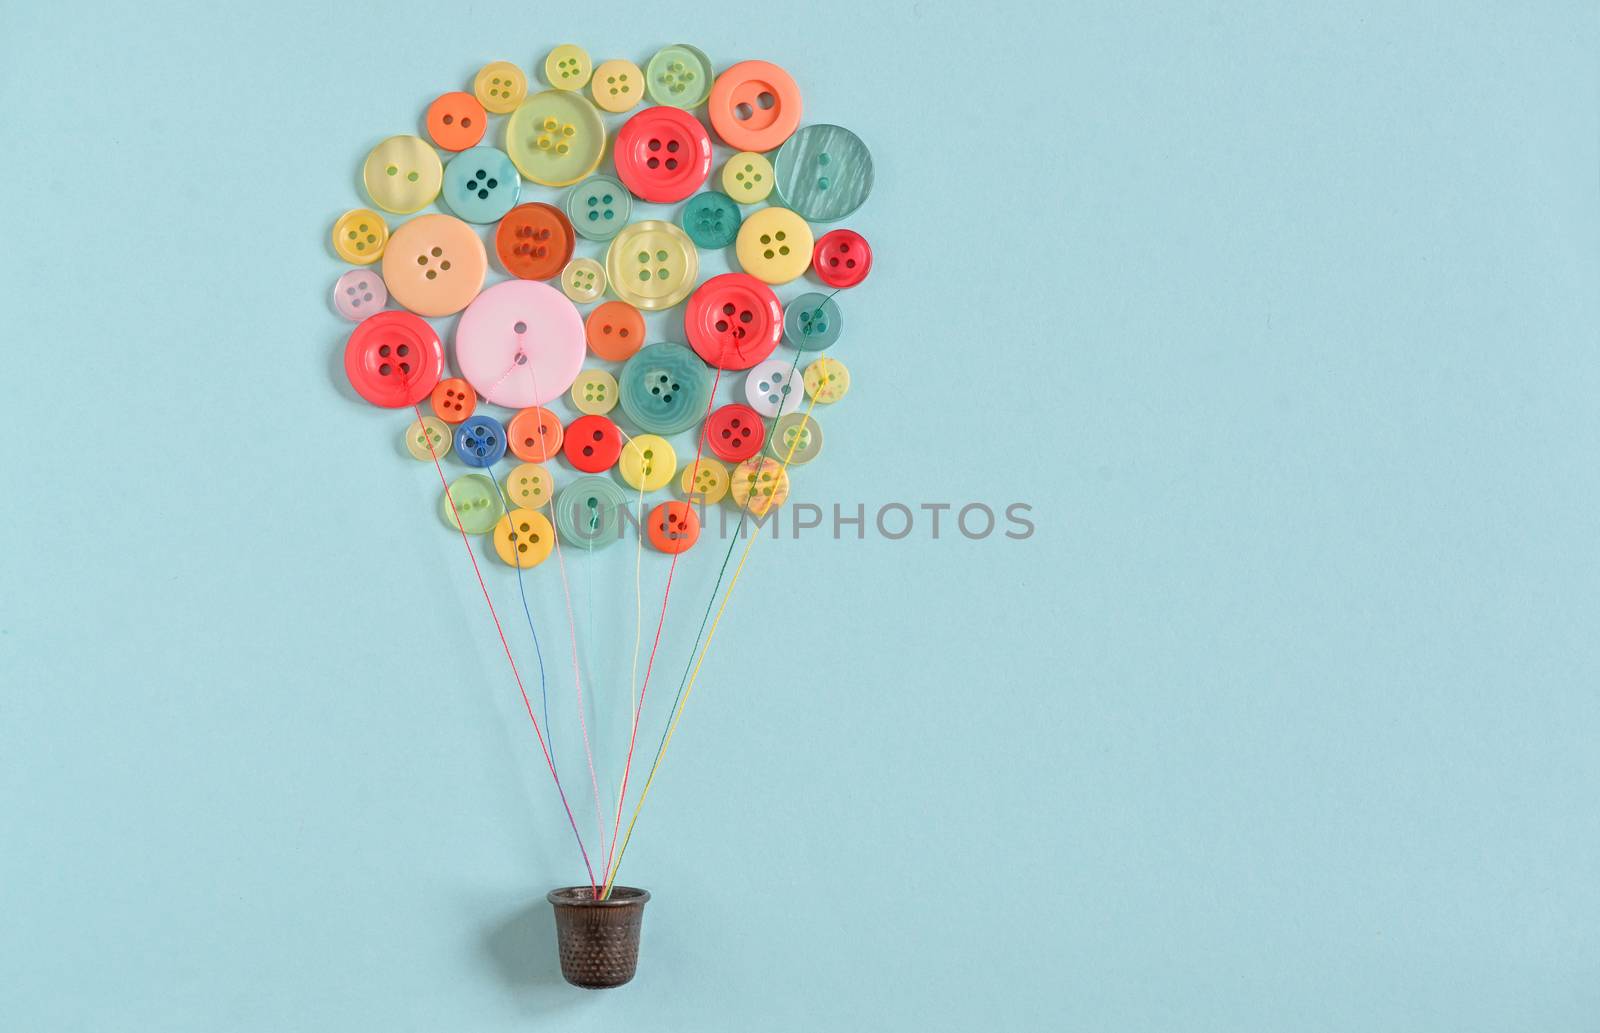 Concept Hot air balloon from colorful sewing buttons 